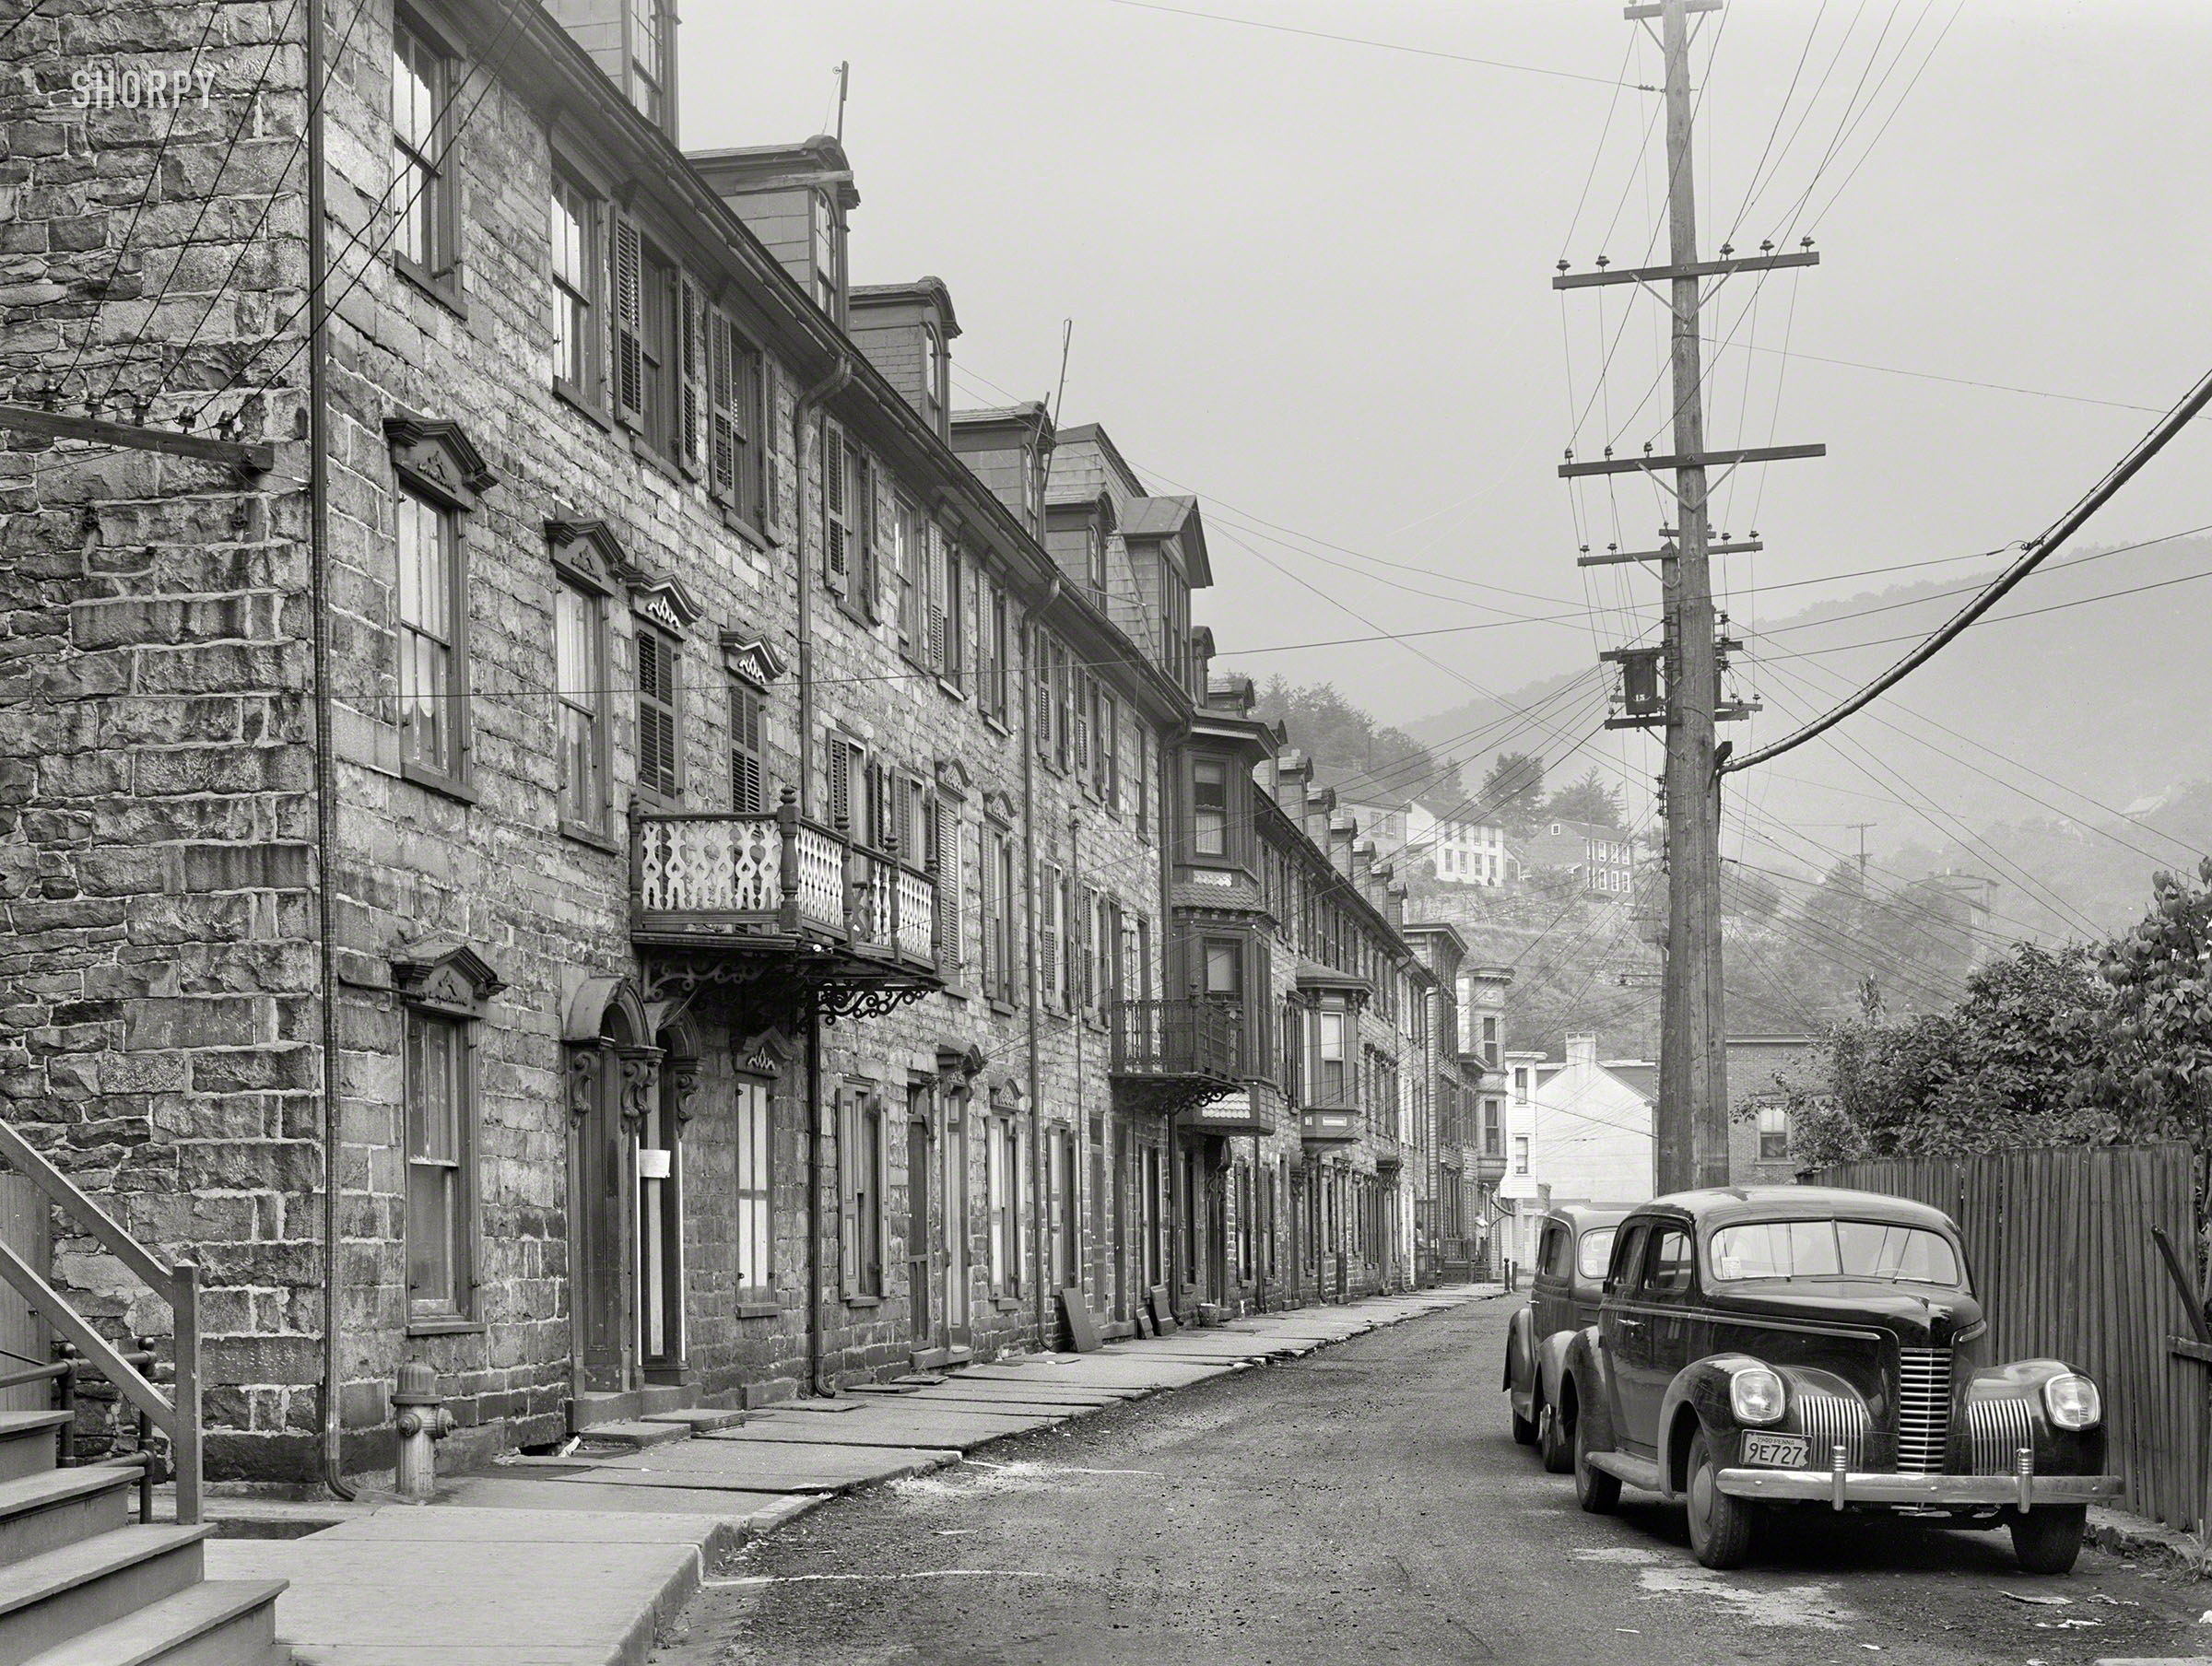 August 1940. "Old houses on Race Street in Mauch Chunk, Pennsylvania." Photo by Jack Delano for the Farm Security Administration. View full size.